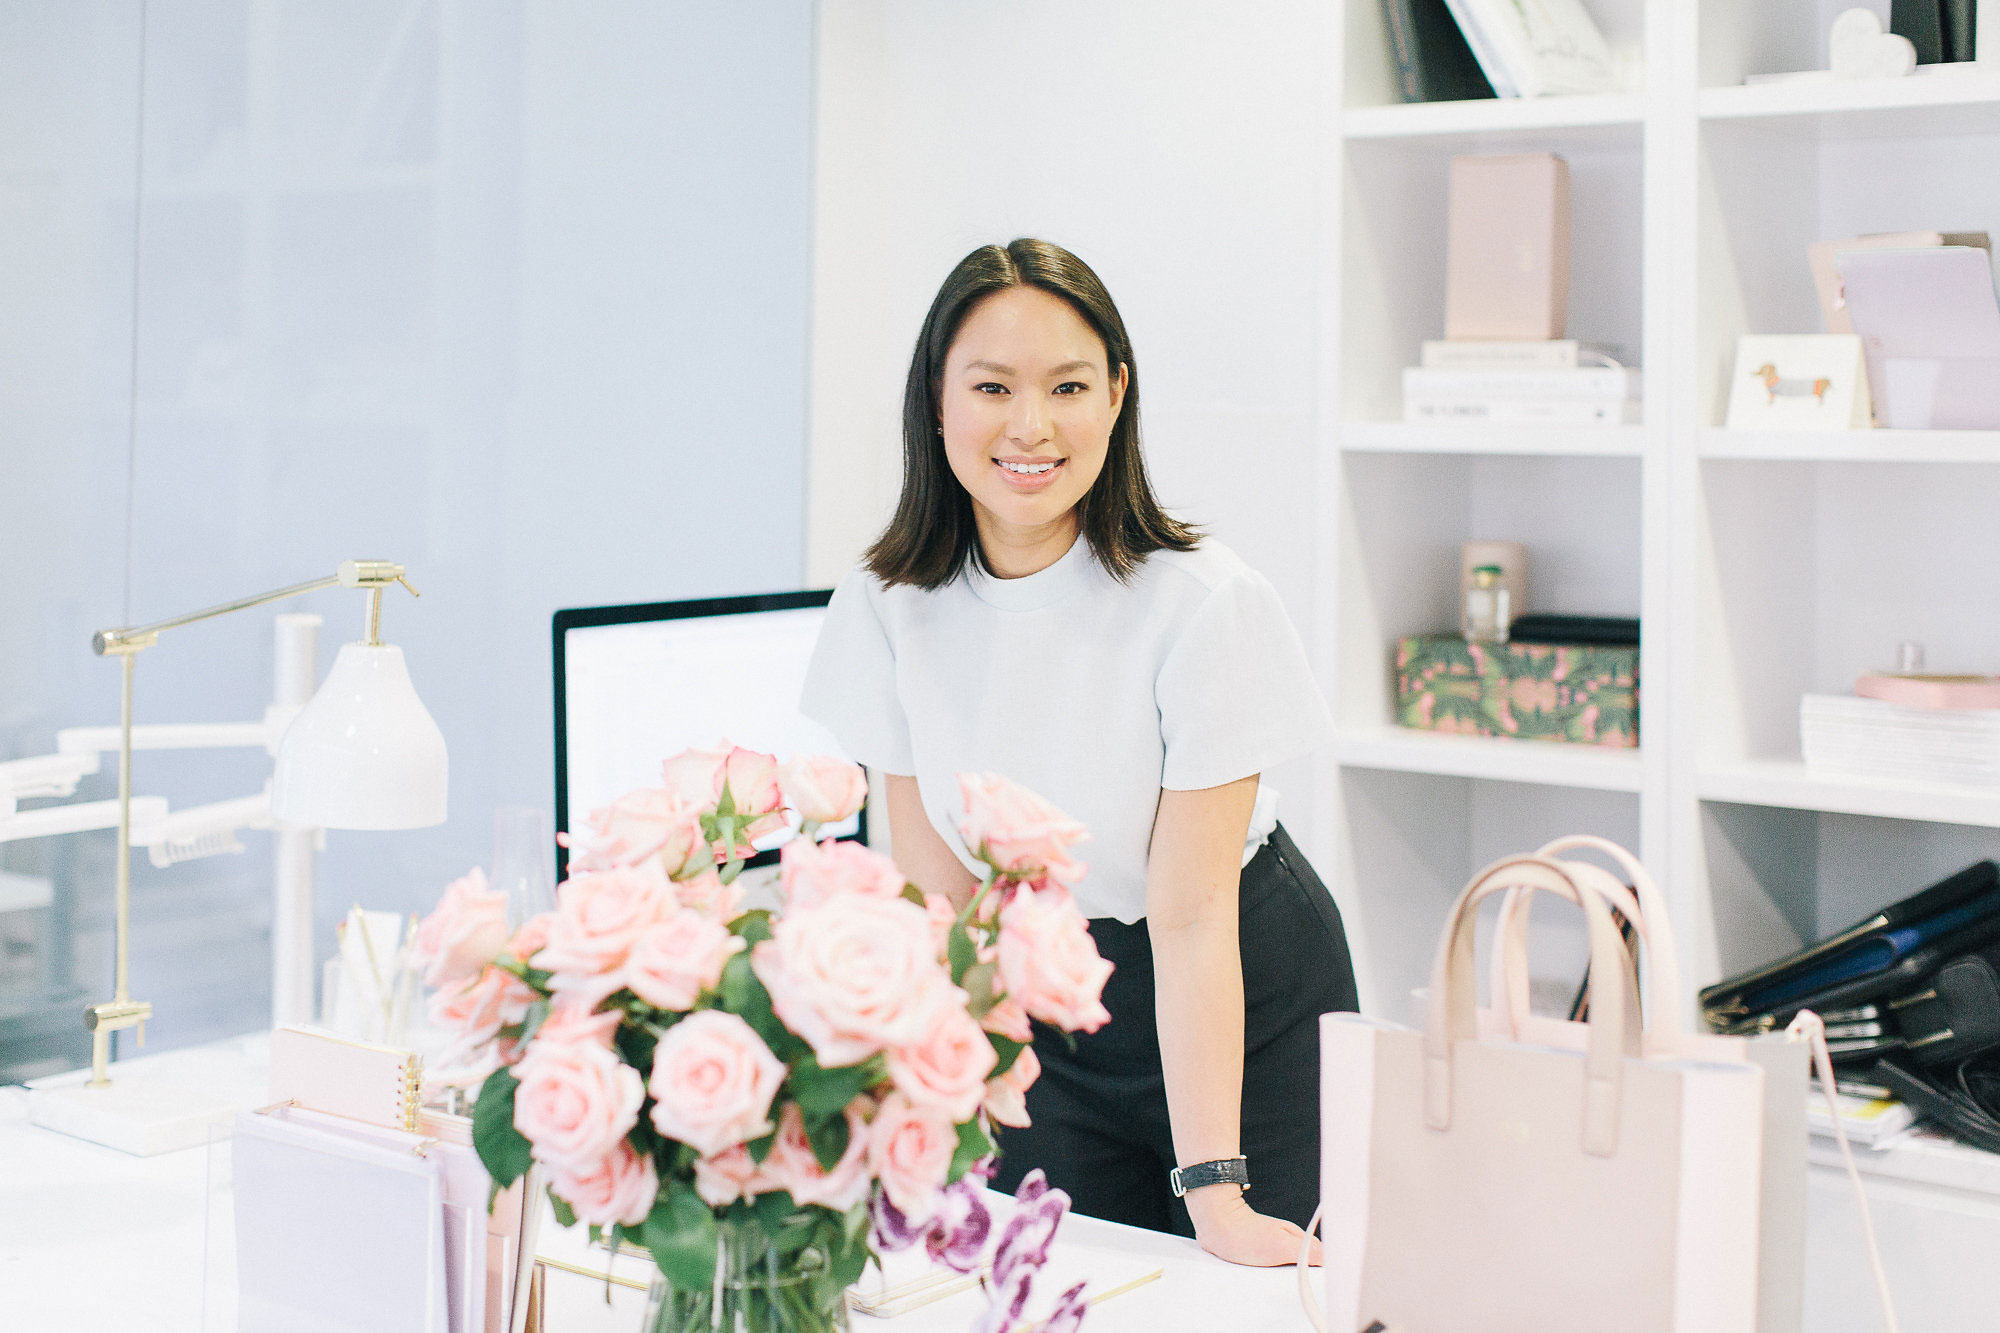 Creative biz series: Alyce Tran, co-founder of the daily edited